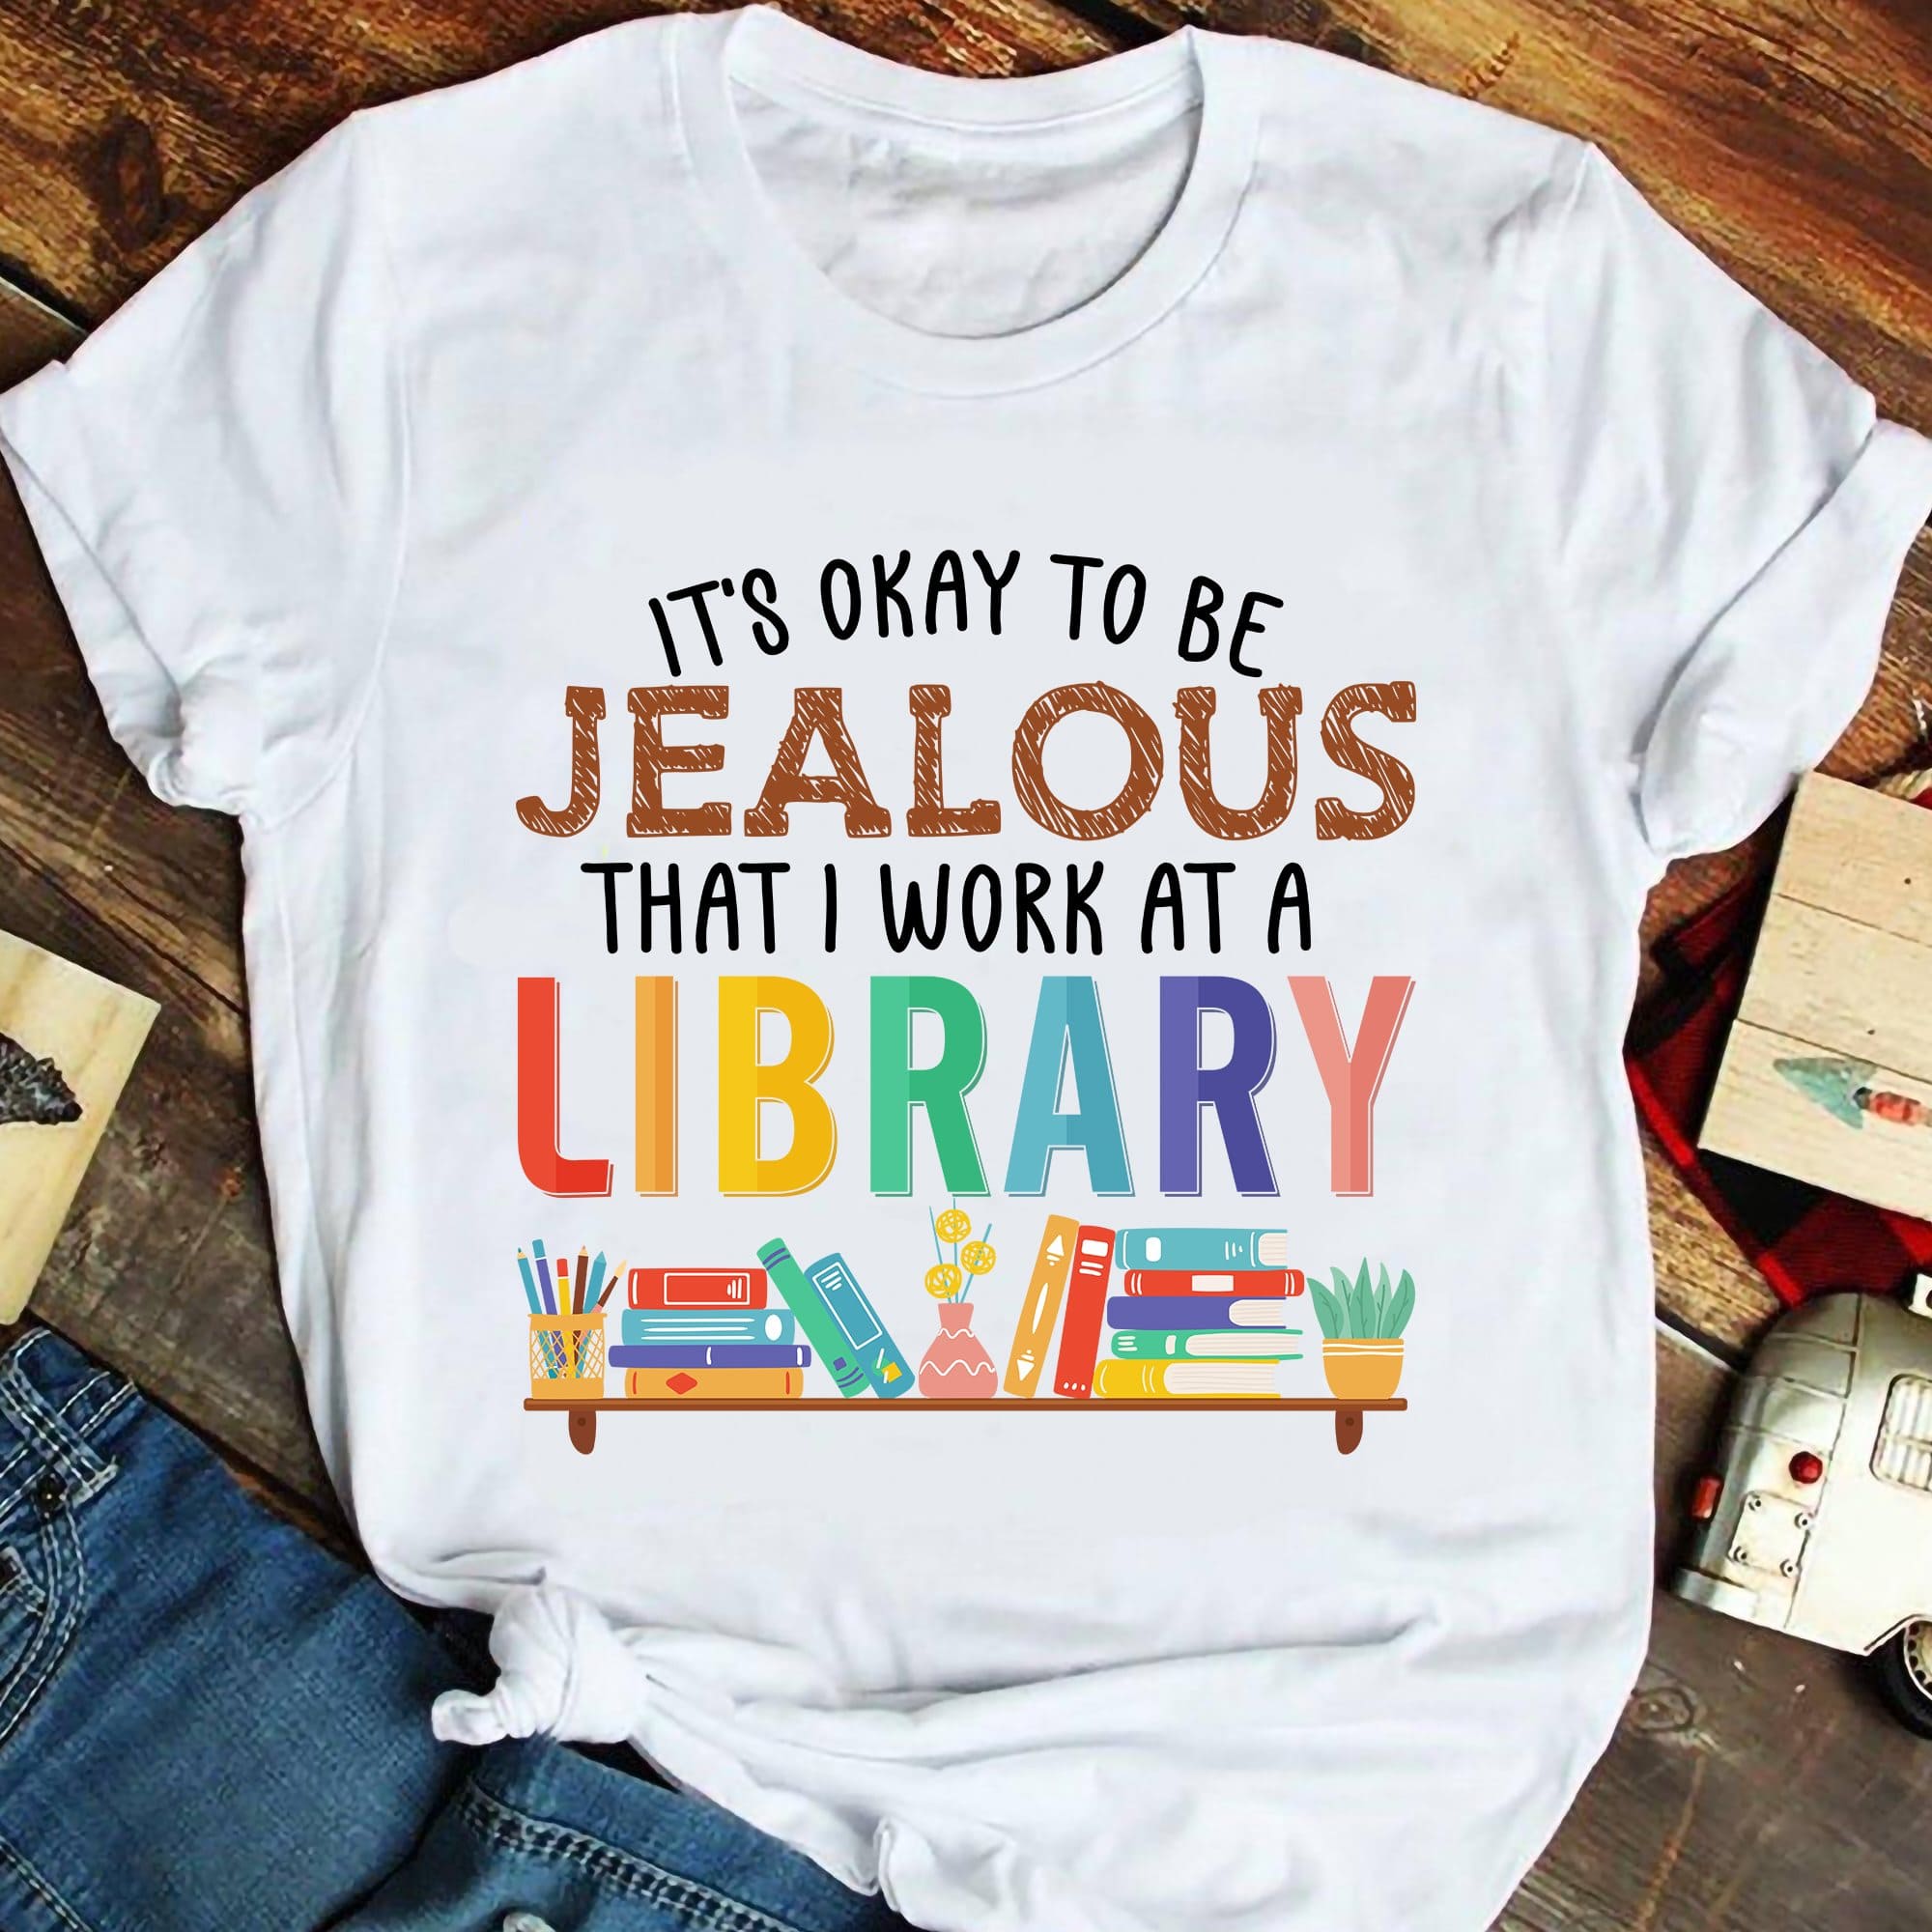 Bookshelf graphic t-shirt - It's okay to be jealous that i work at a library